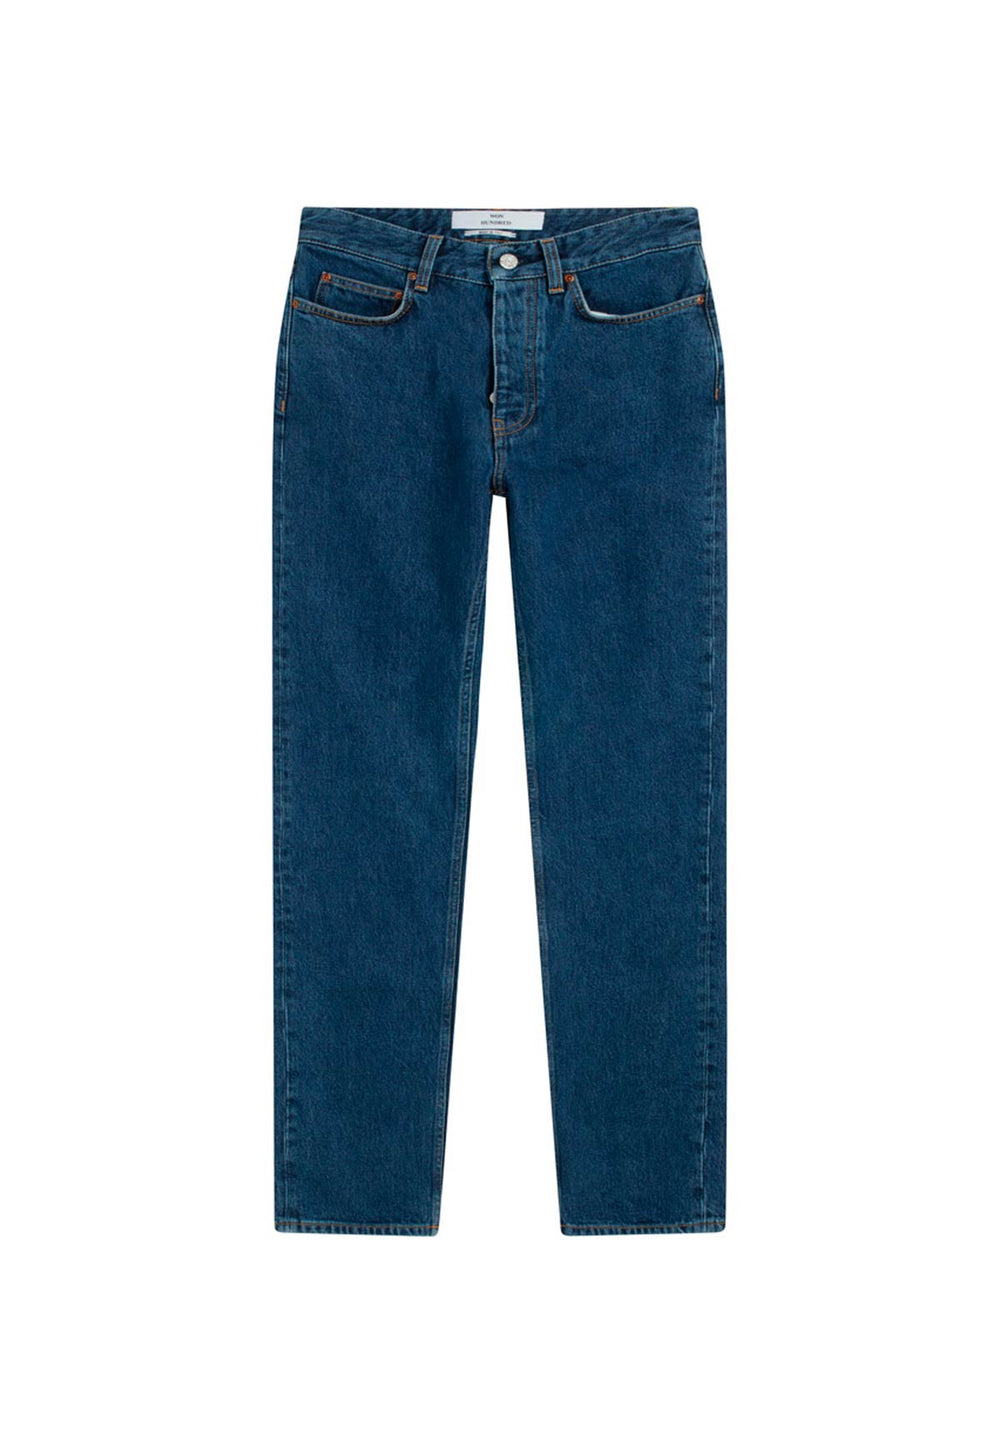 PEARL JEANS STONE BLUE - Moeon